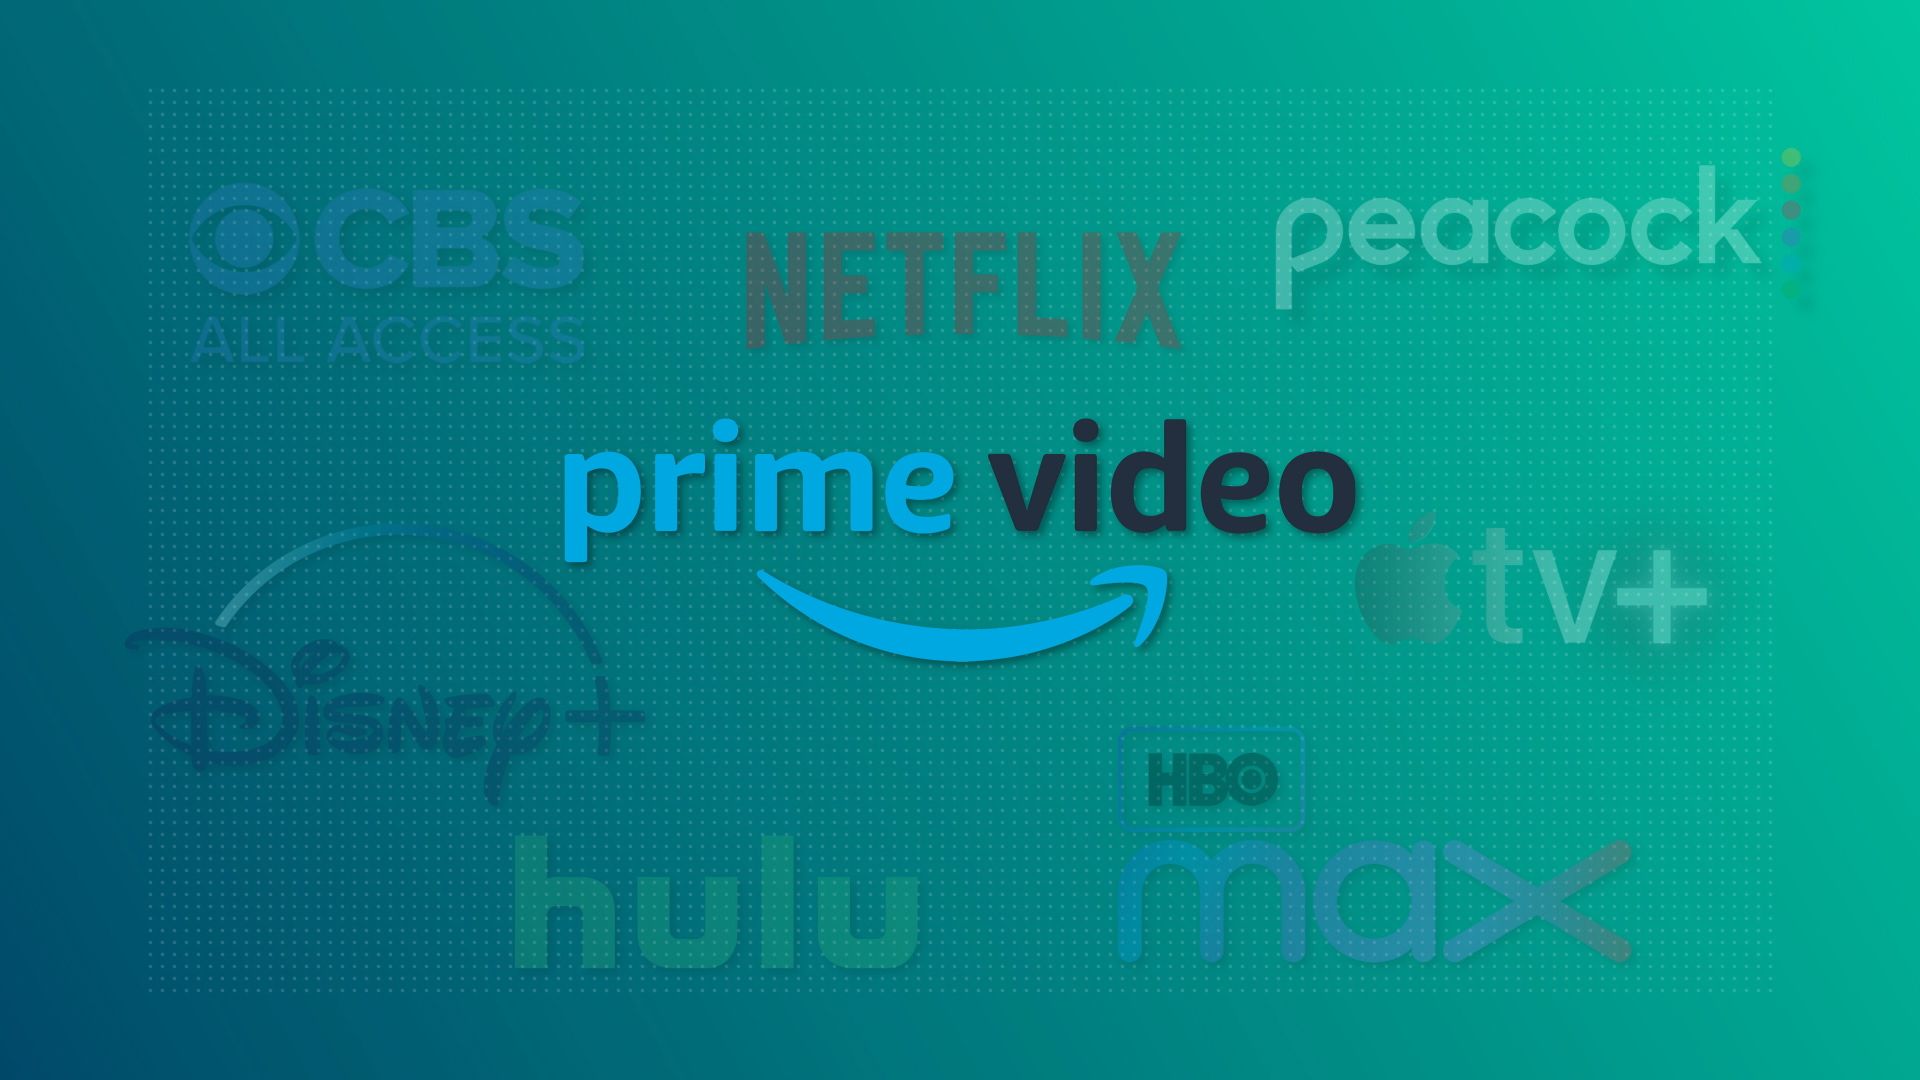 how to add a device to amazon prime video account